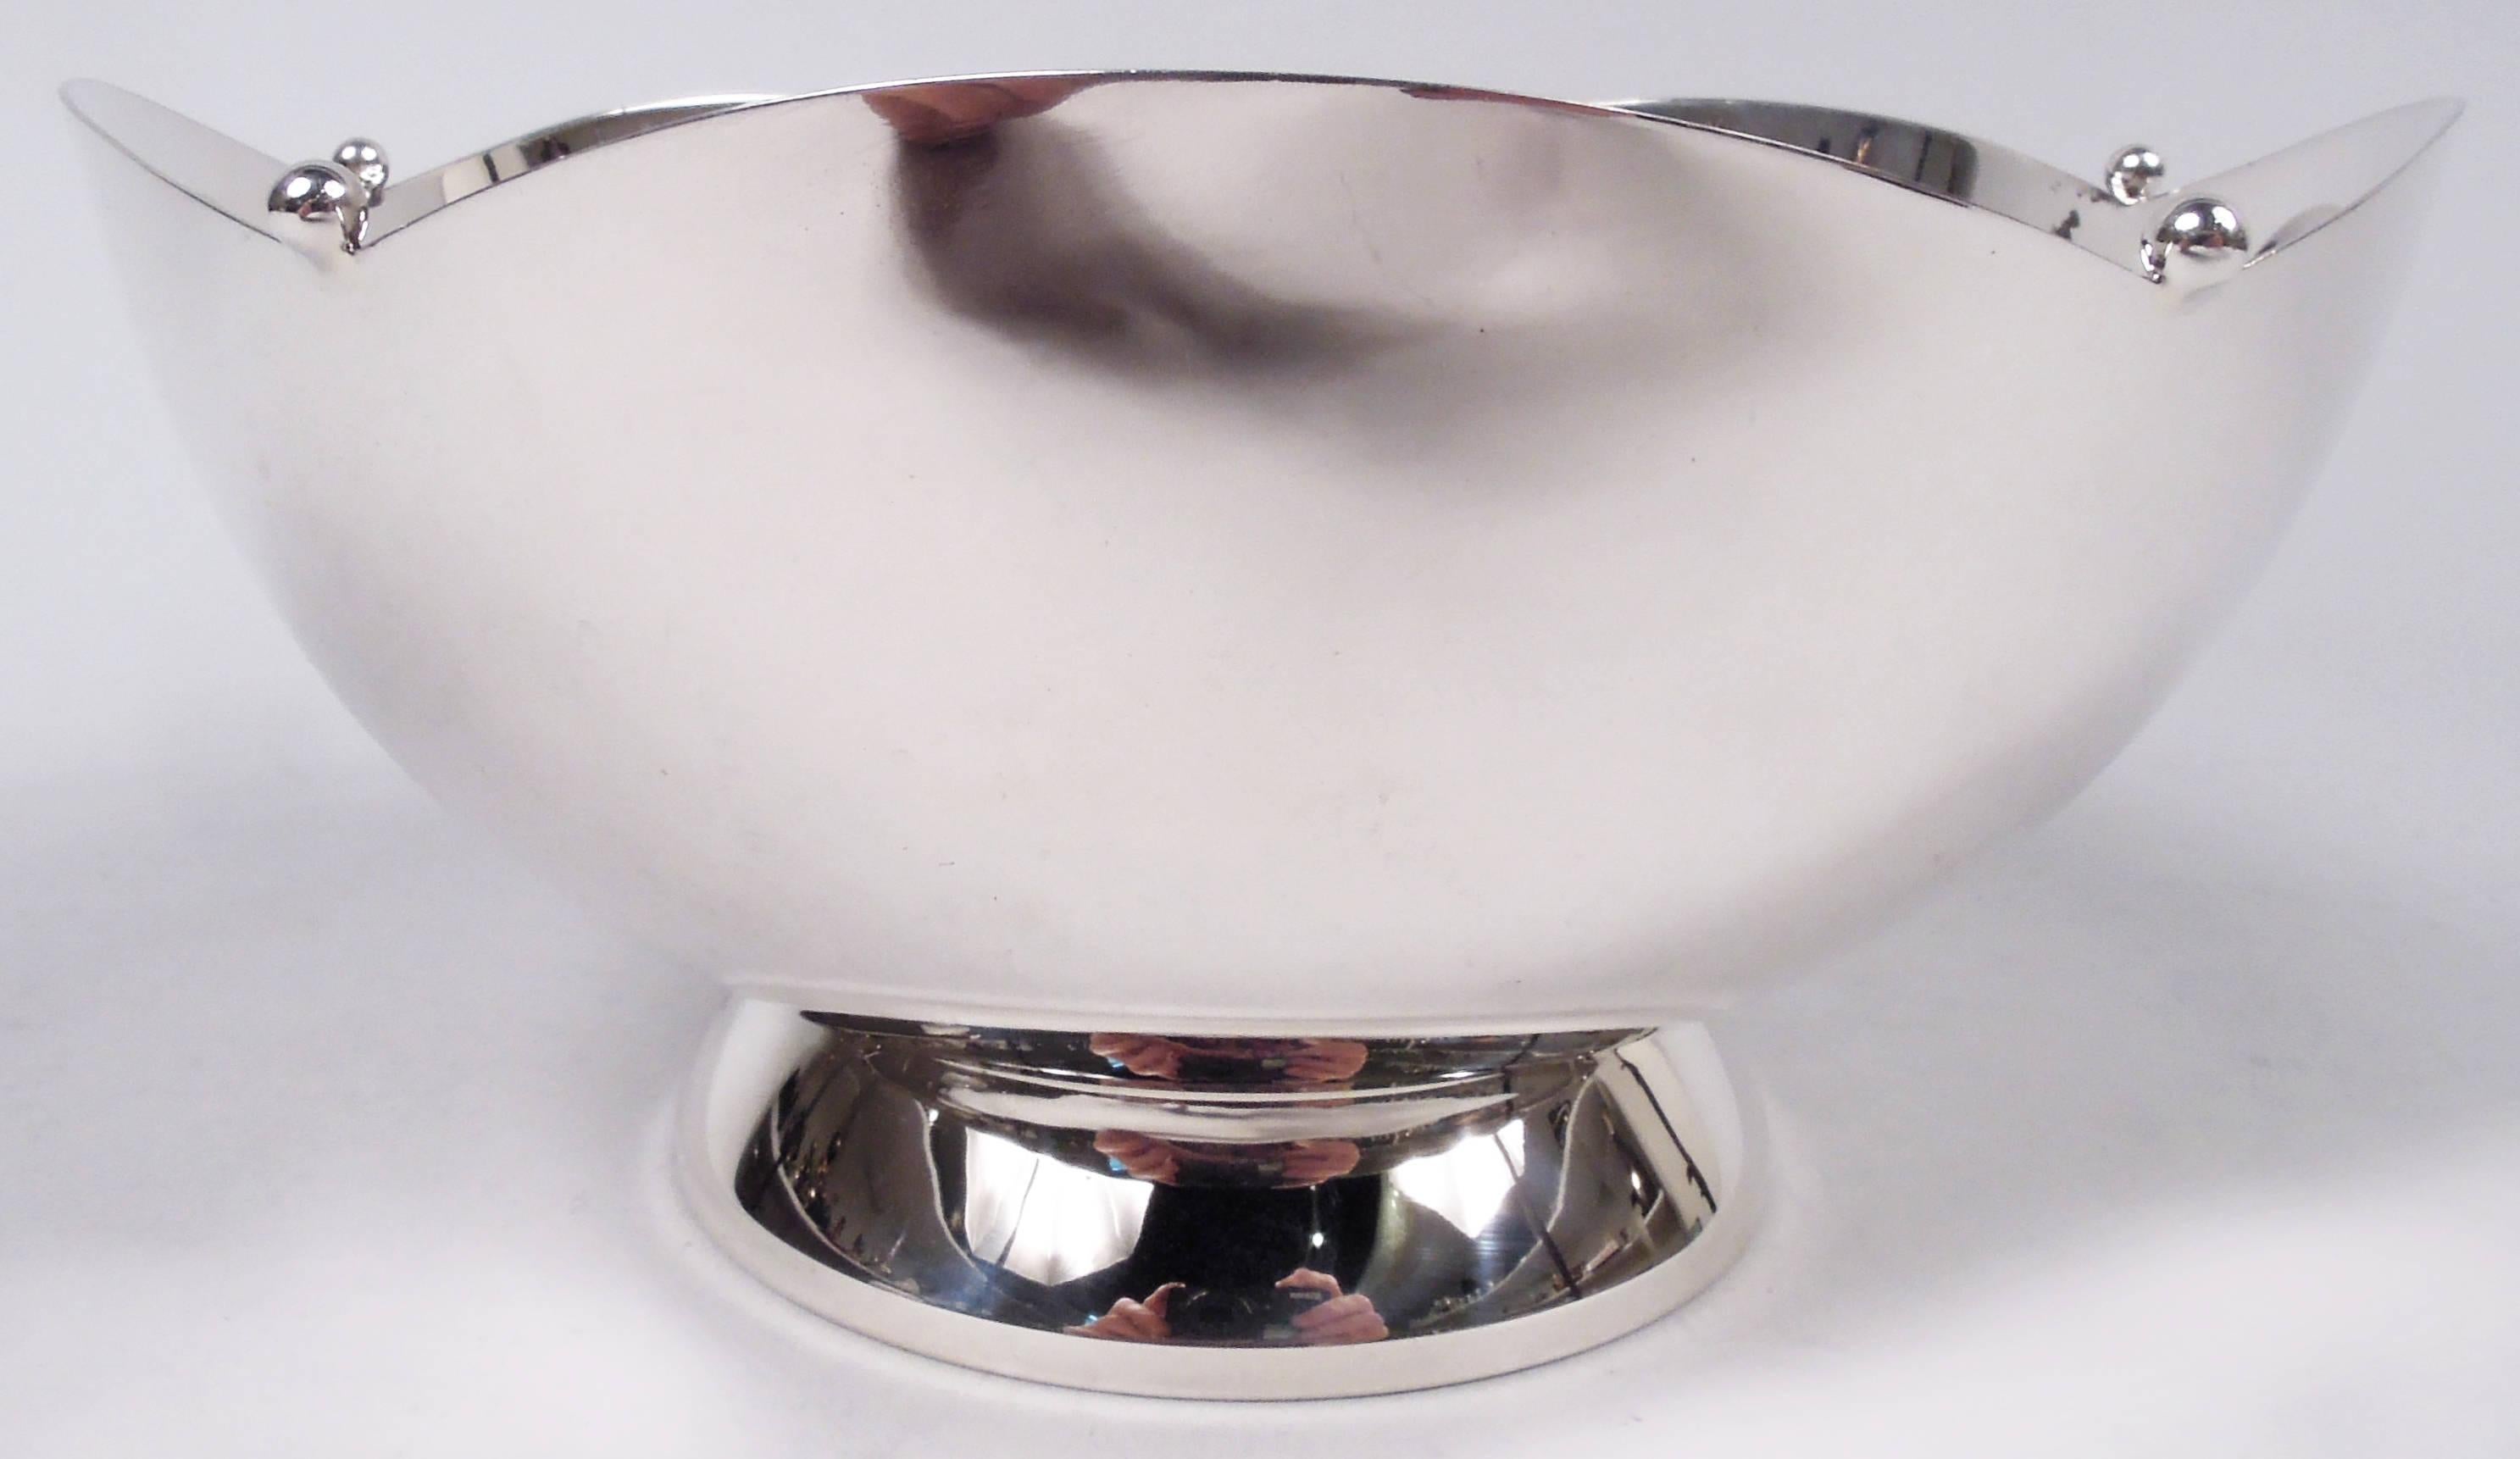 Art Deco sterling silver bowl. Made by Currier & Roby in New York, ca 1930. Curved sides and raised and spread foot; mouth rim has wide scallops with applied beads. Fully marked including maker’s and retailer’s (Cartier) stamps and no. 606. Weight: